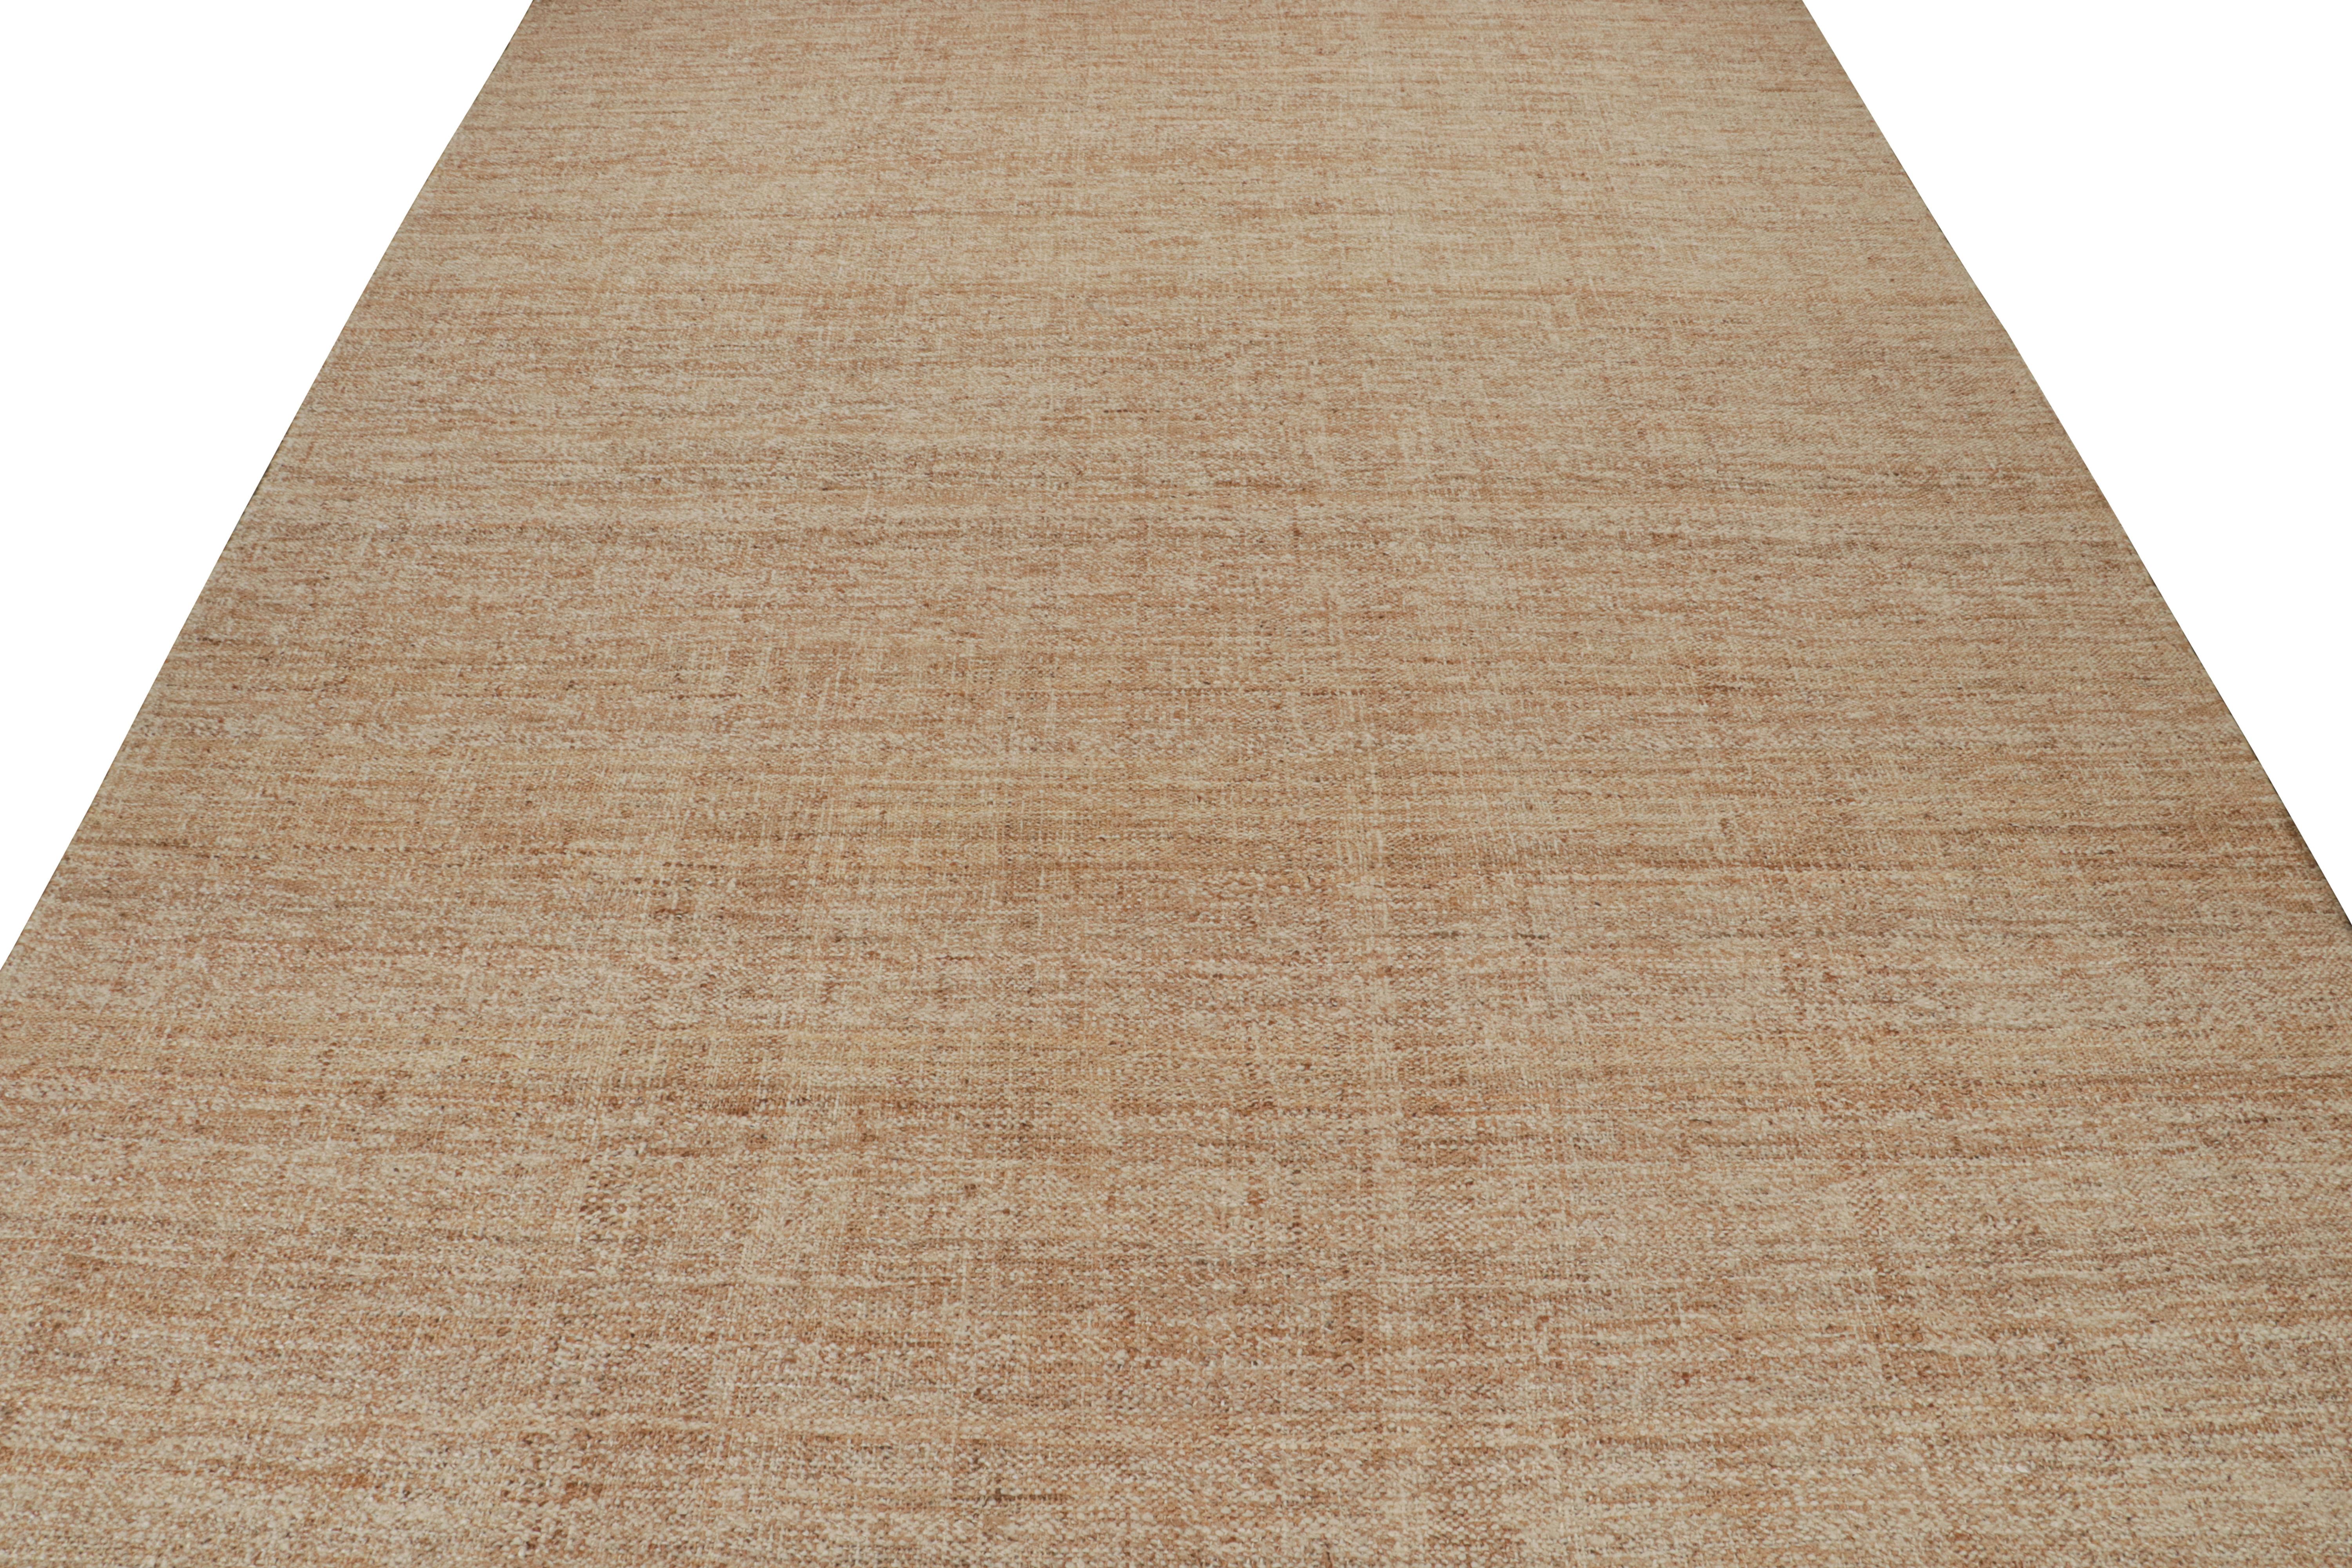 Indian Rug & Kilim’s Contemporary Jute kilim in Beige-Brown For Sale